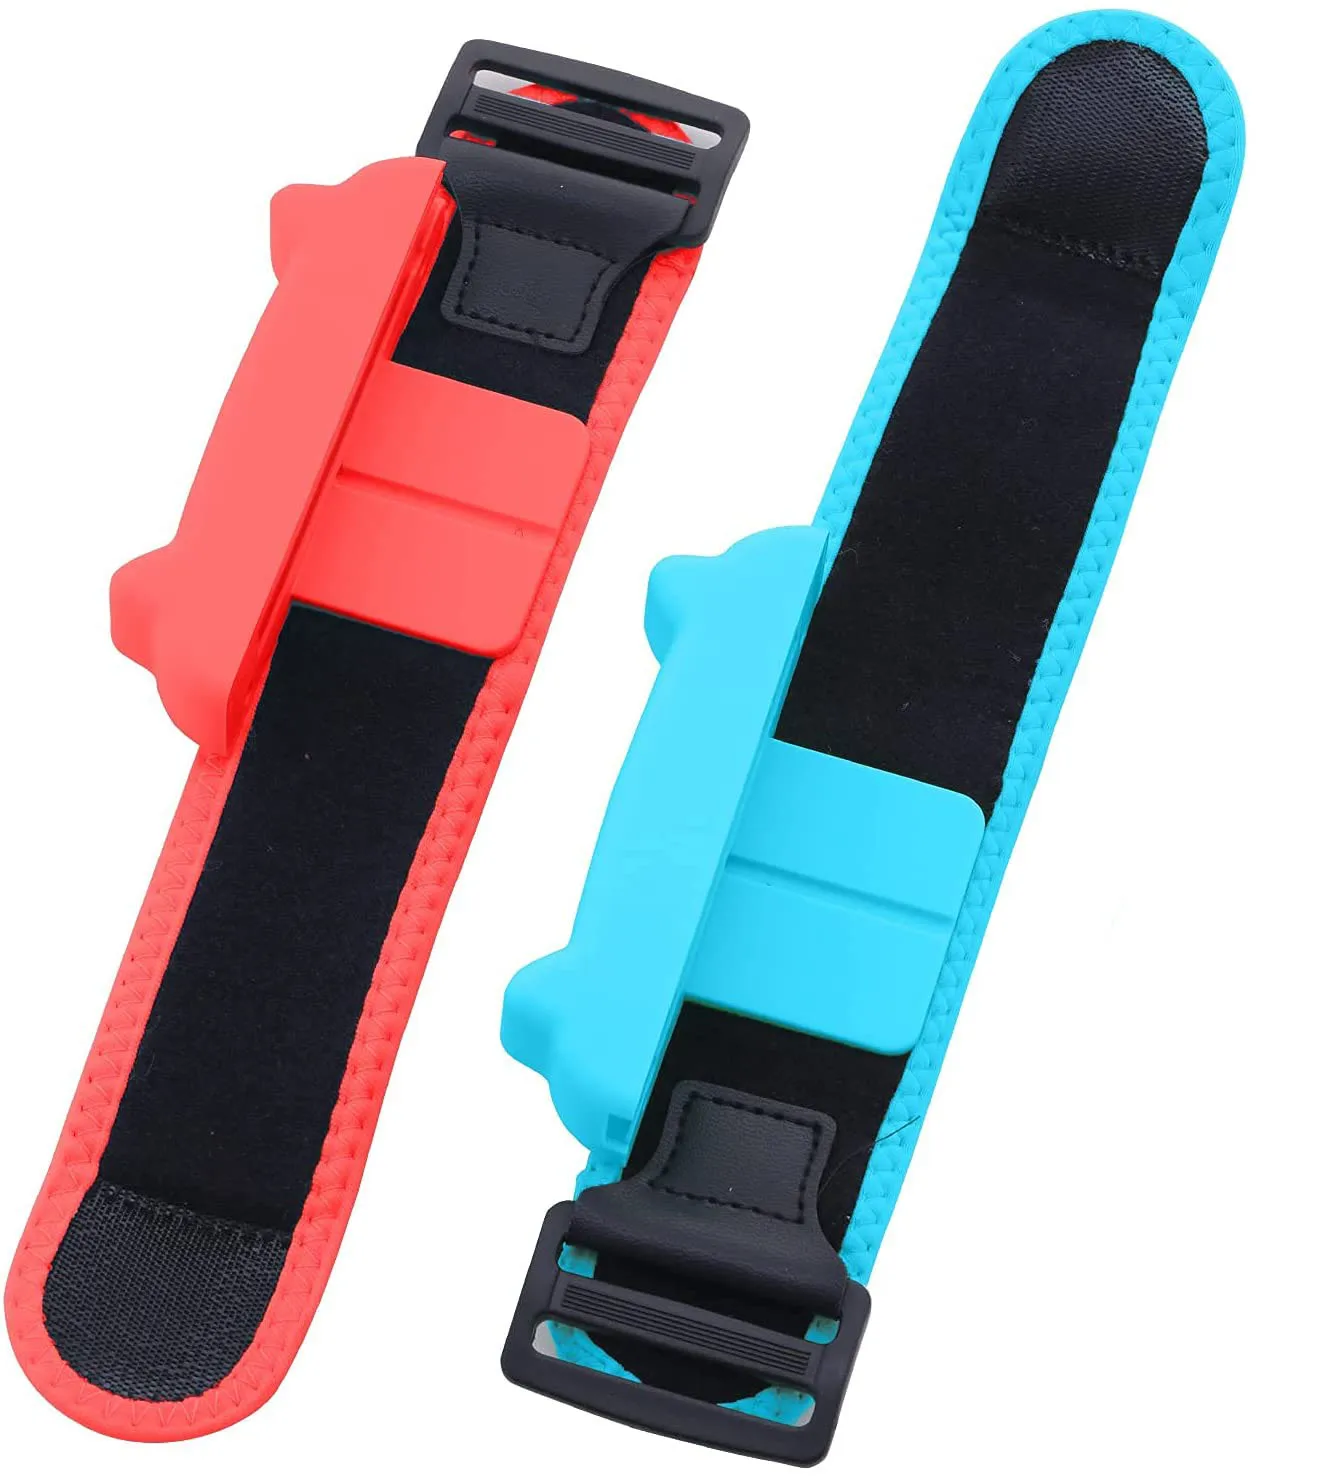 Adjustable Right/Left Elastic Straps Controller Joypad Wrist Band With 6-7  Inches Soft Fabrics Circumference For Nintendo Switch